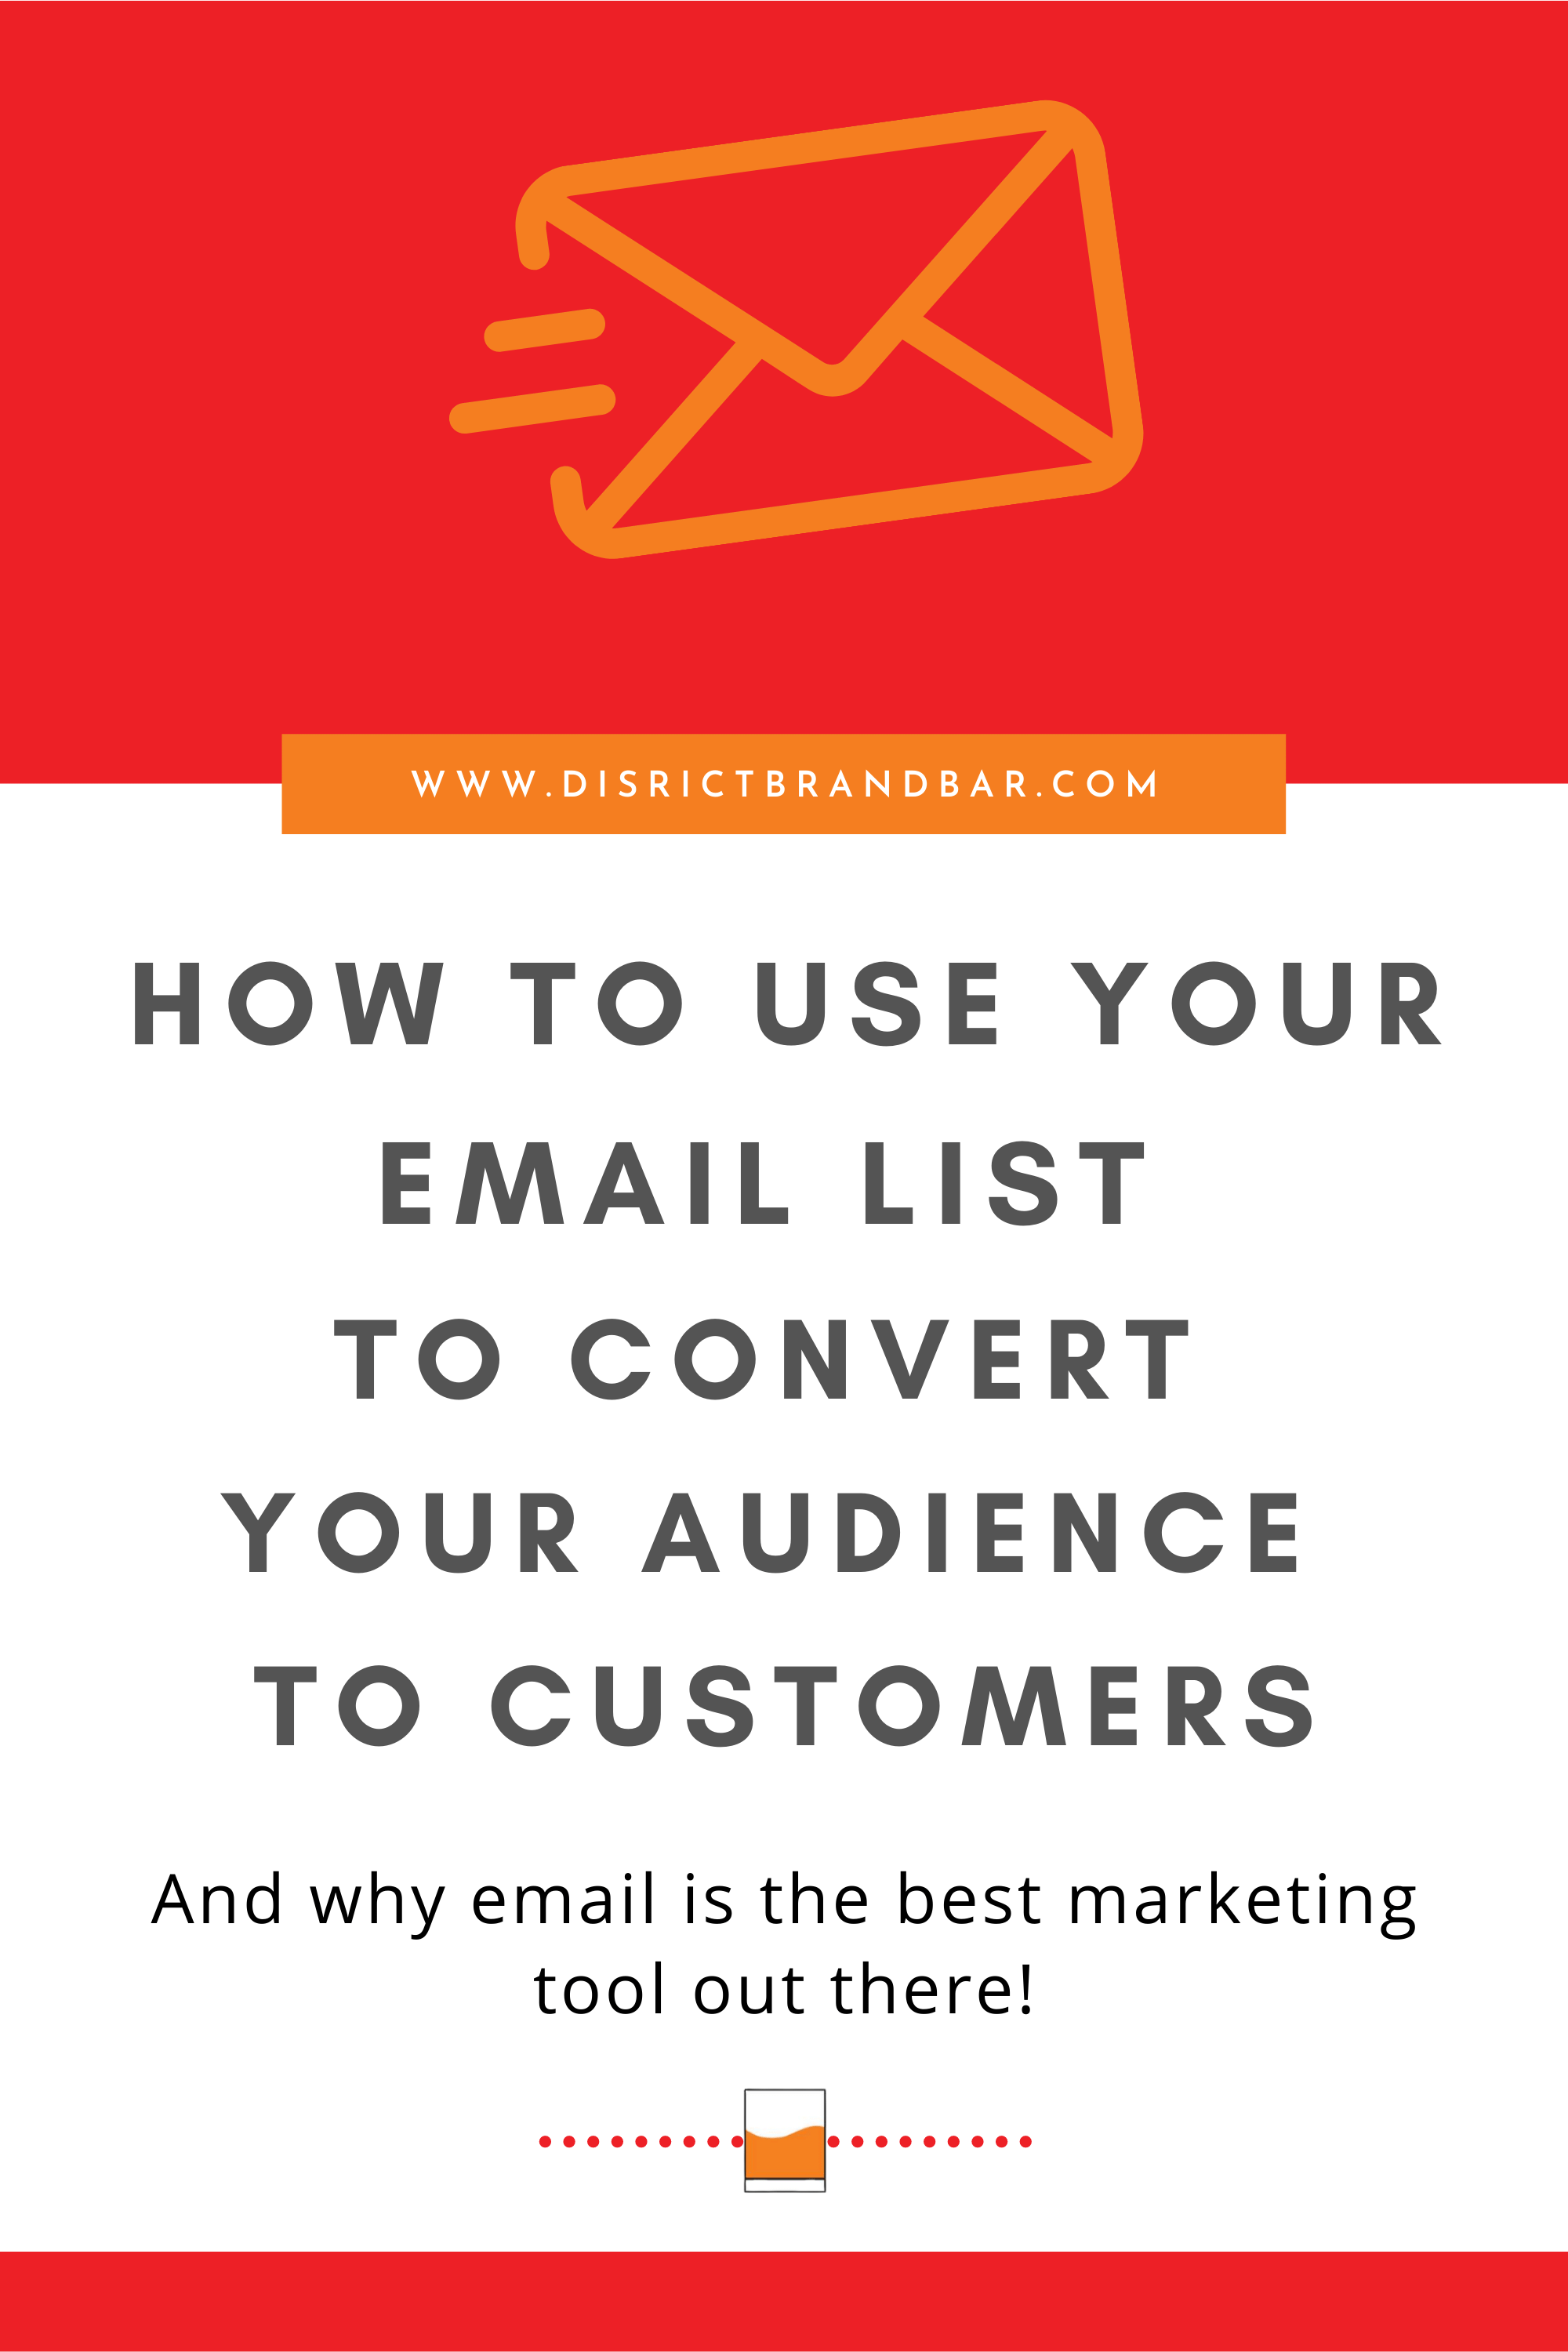 Convert your audience to customers with your email list